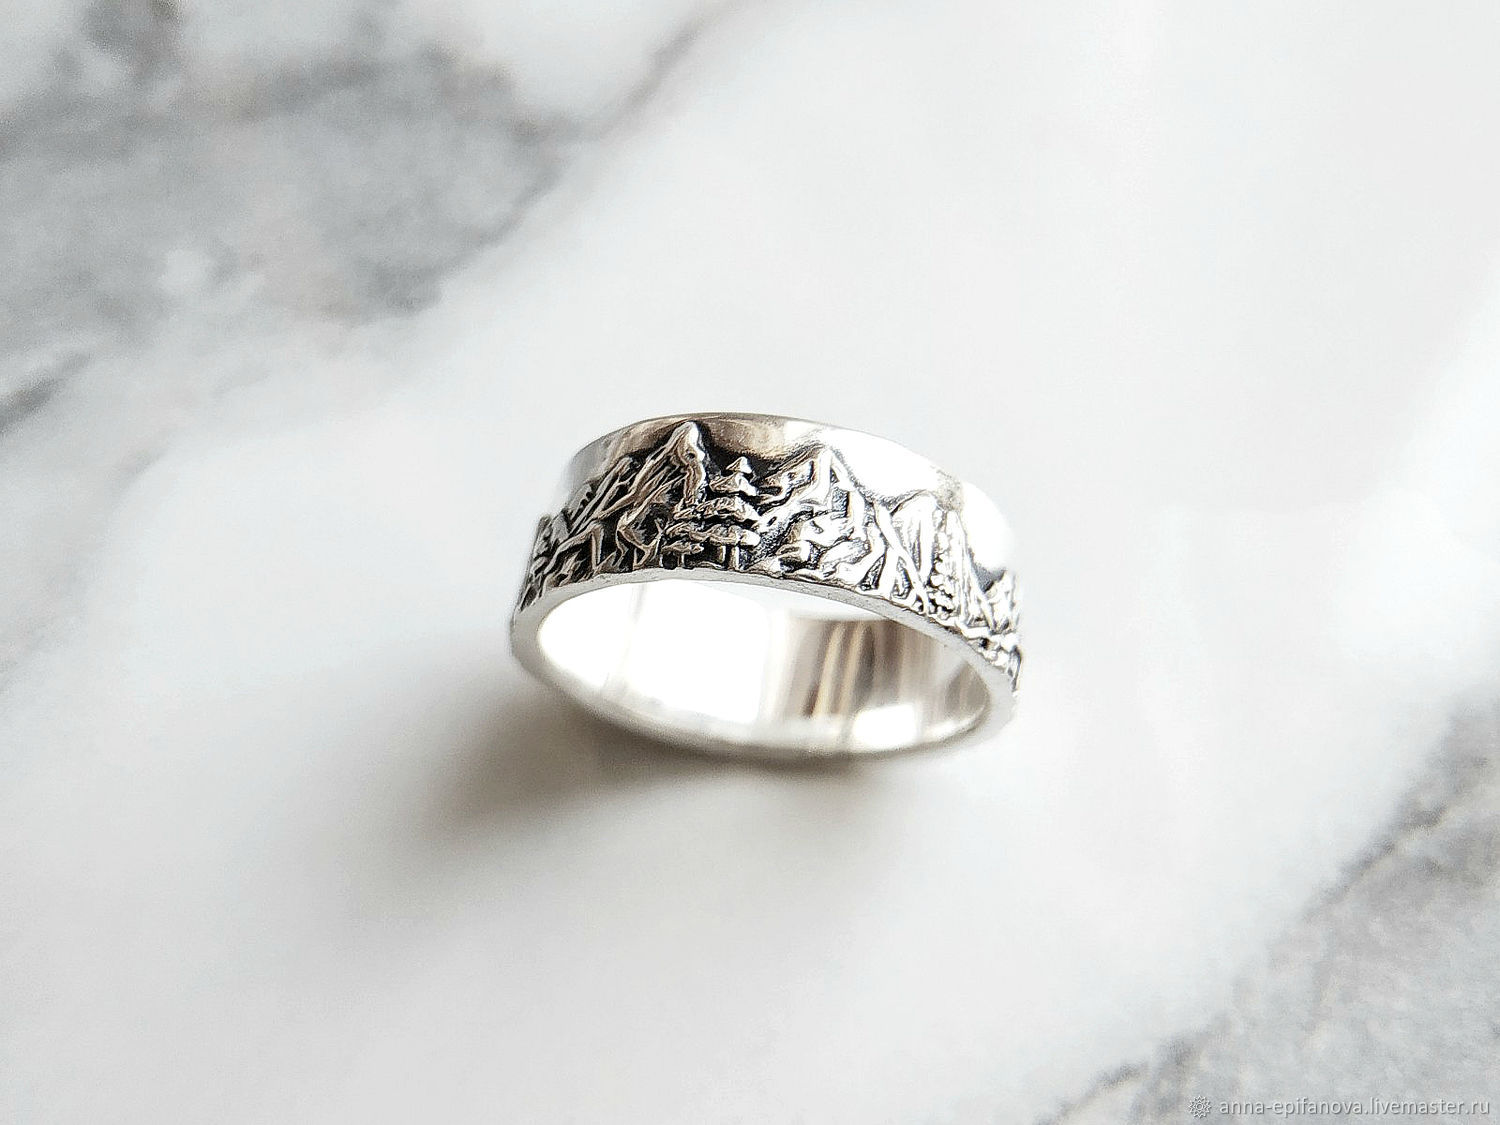 Ring 'Mountains and pines' in silver with blackening (Ob32), Engagement rings, Chelyabinsk,  Фото №1